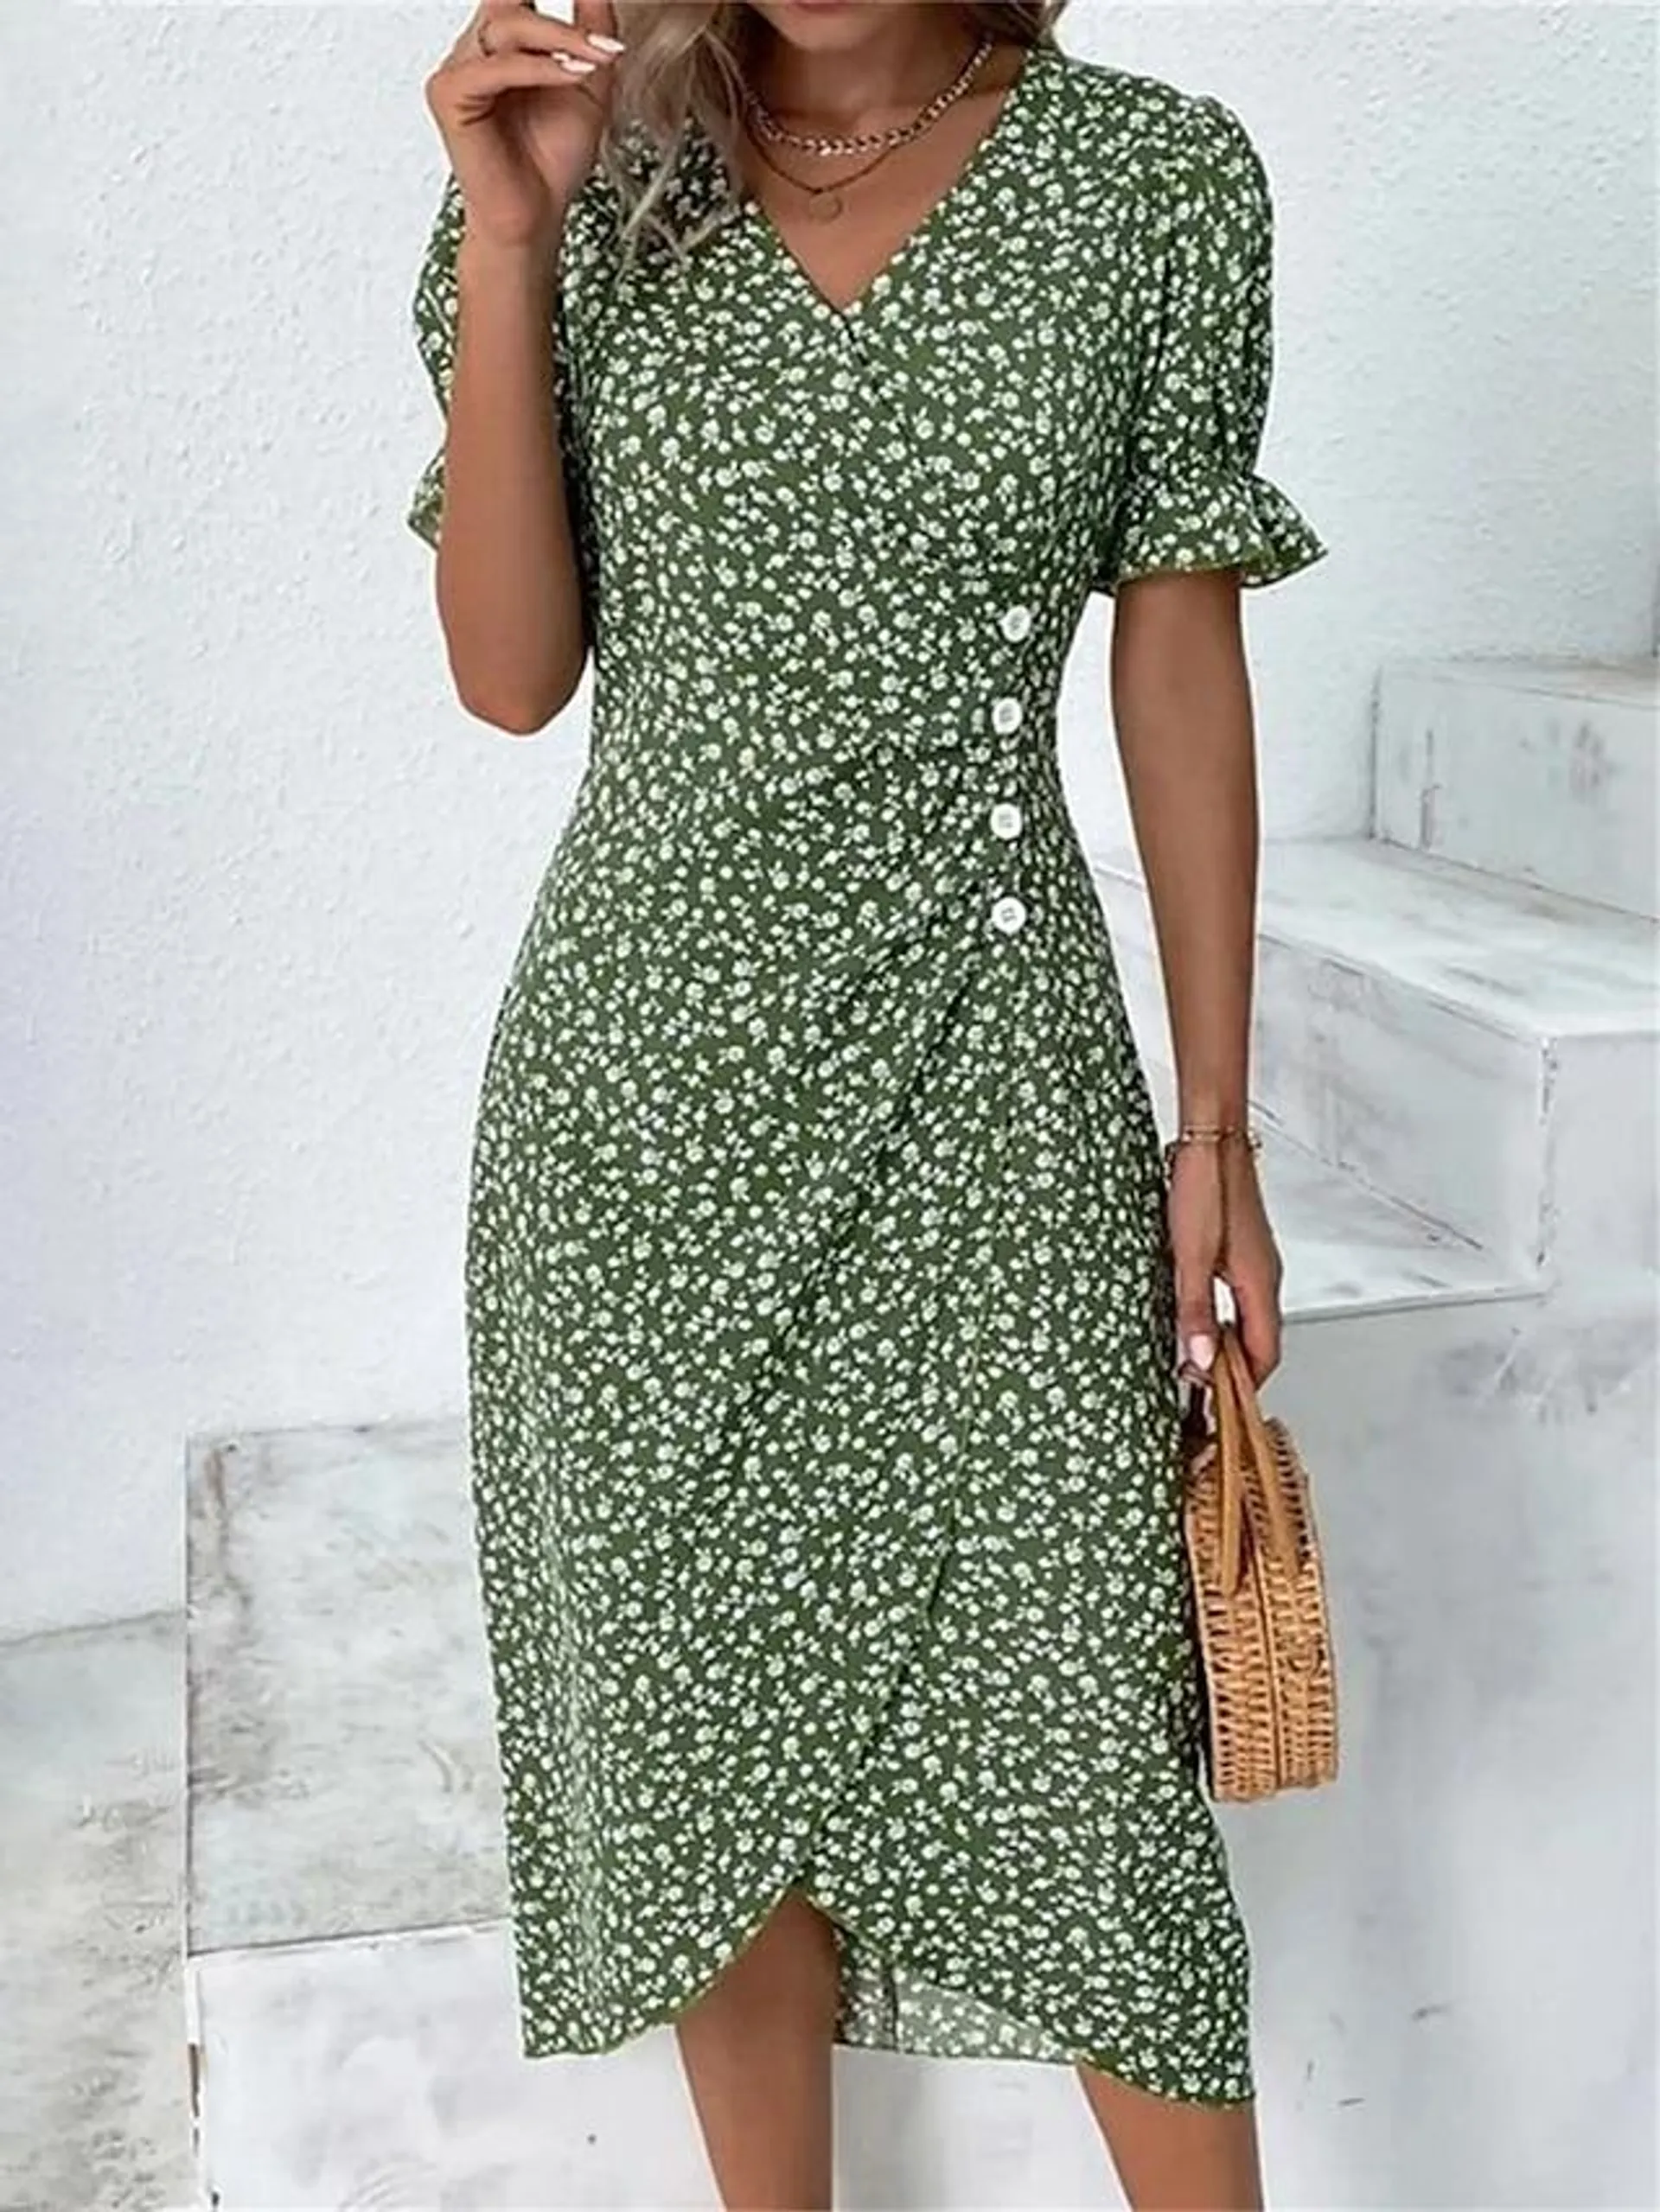 Women's Casual Dress Wrap Dress Floral Dress Floral Button Print V Neck Midi Dress Fashion Classic Daily Holiday Short Sleeve Regular Fit Black Yellow Pink Summer Spring S M L XL XXL